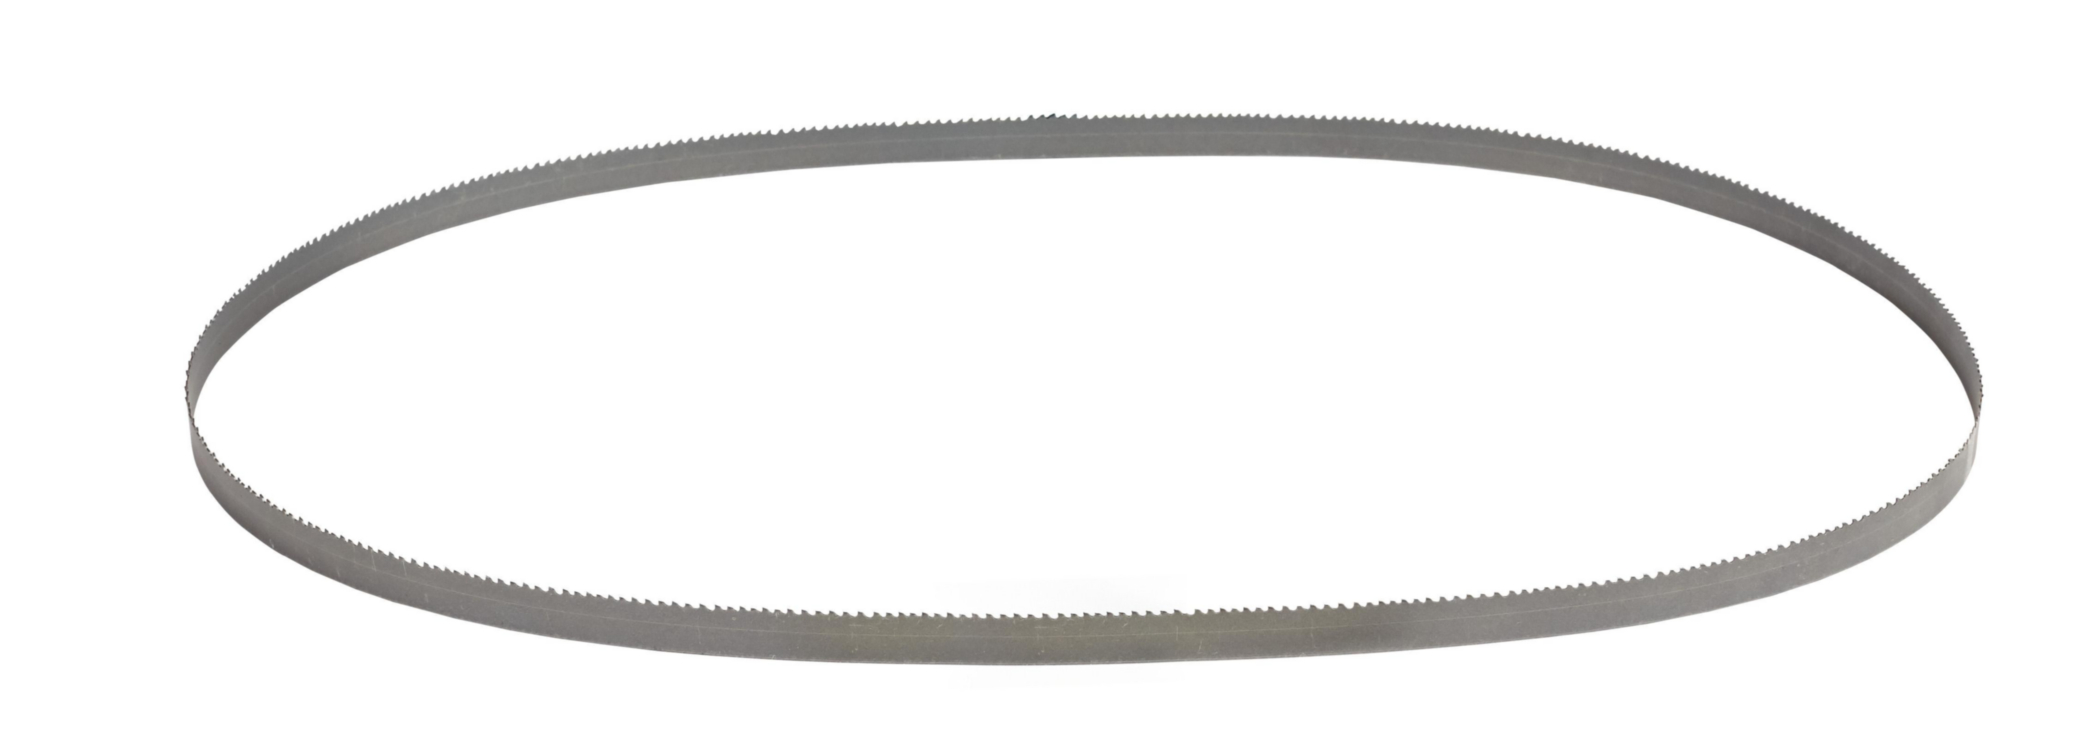 MILWAUKEE 48-39-0711 Band Saw Blade 27 in 12/14 TPI